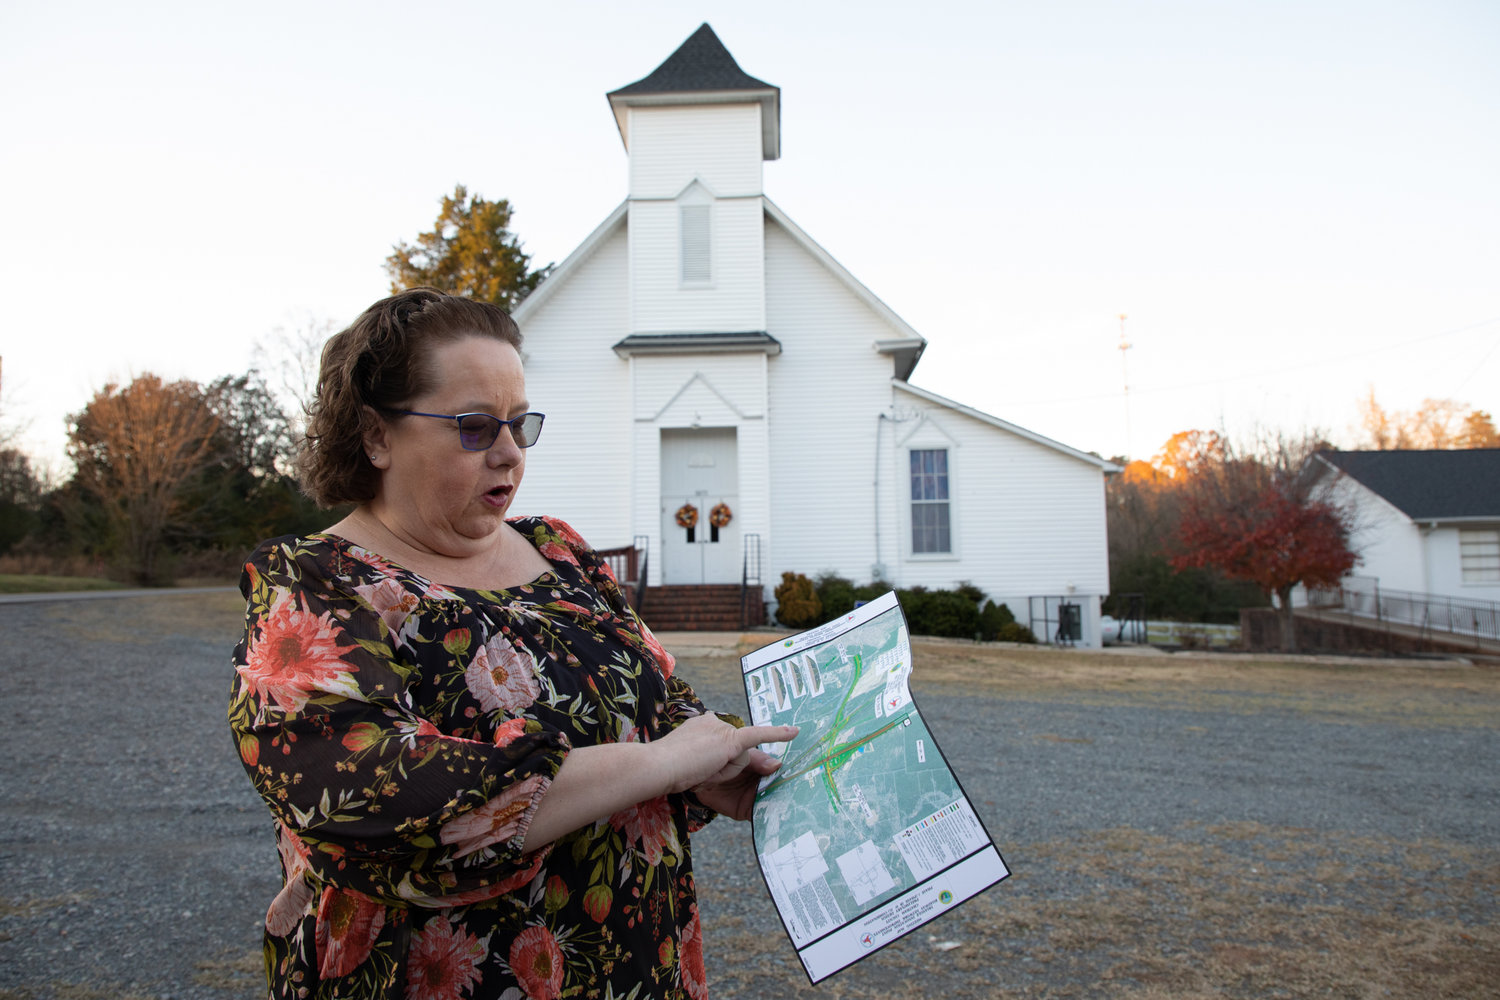 Sharron Bouquin, 60, stands in front of Merry Oaks Baptist Church with the maps of proposed roadway plans from N.C. Dept. of Transportation. The church is slated to be taken by NCDOT to make way for the new VinFast manufacturing facility in Moncure.